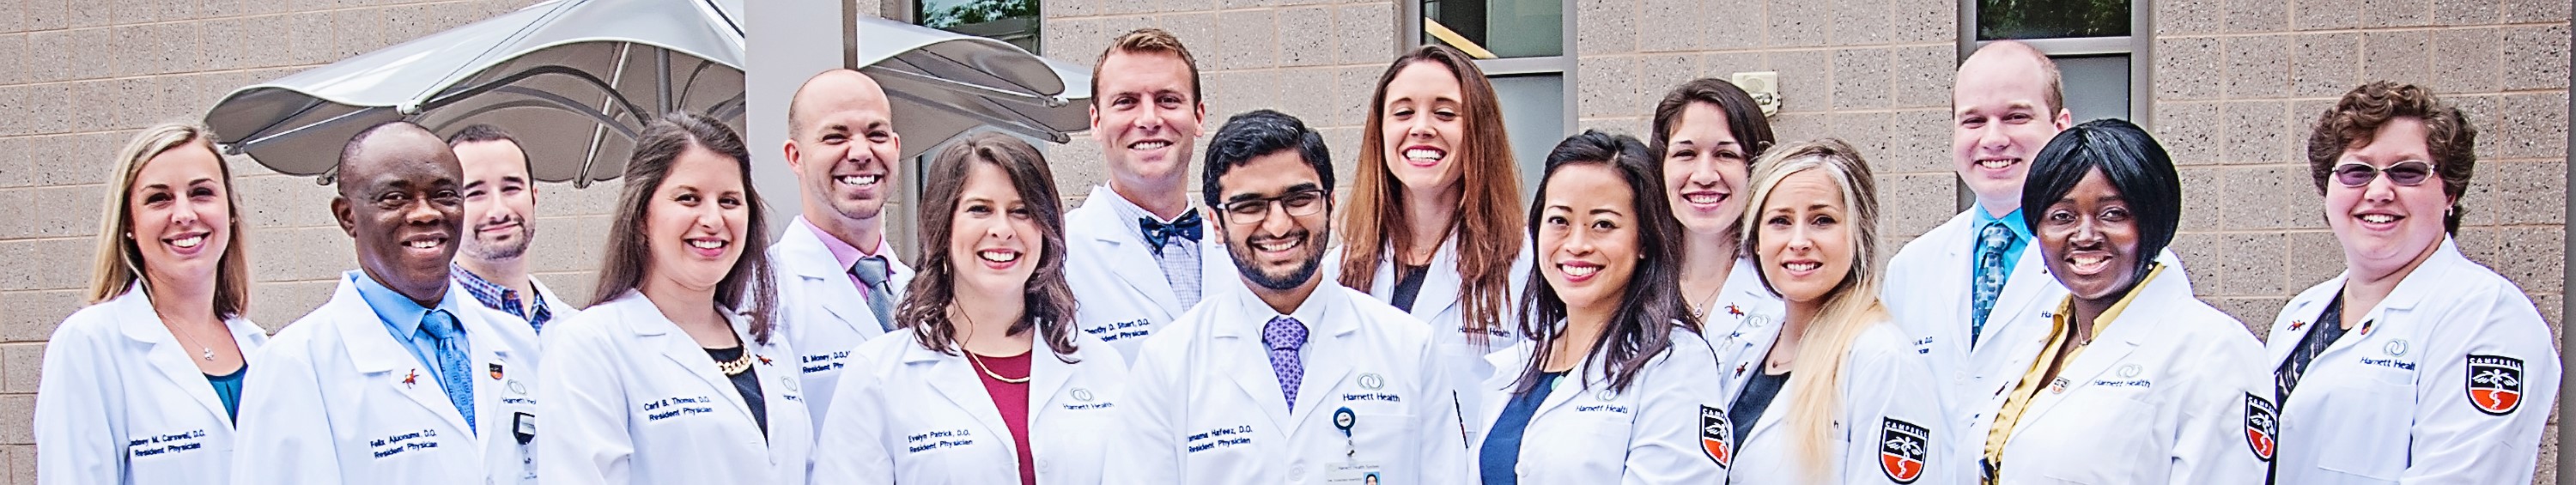 Harnett Health to Graduate First Class of Resident Physicians